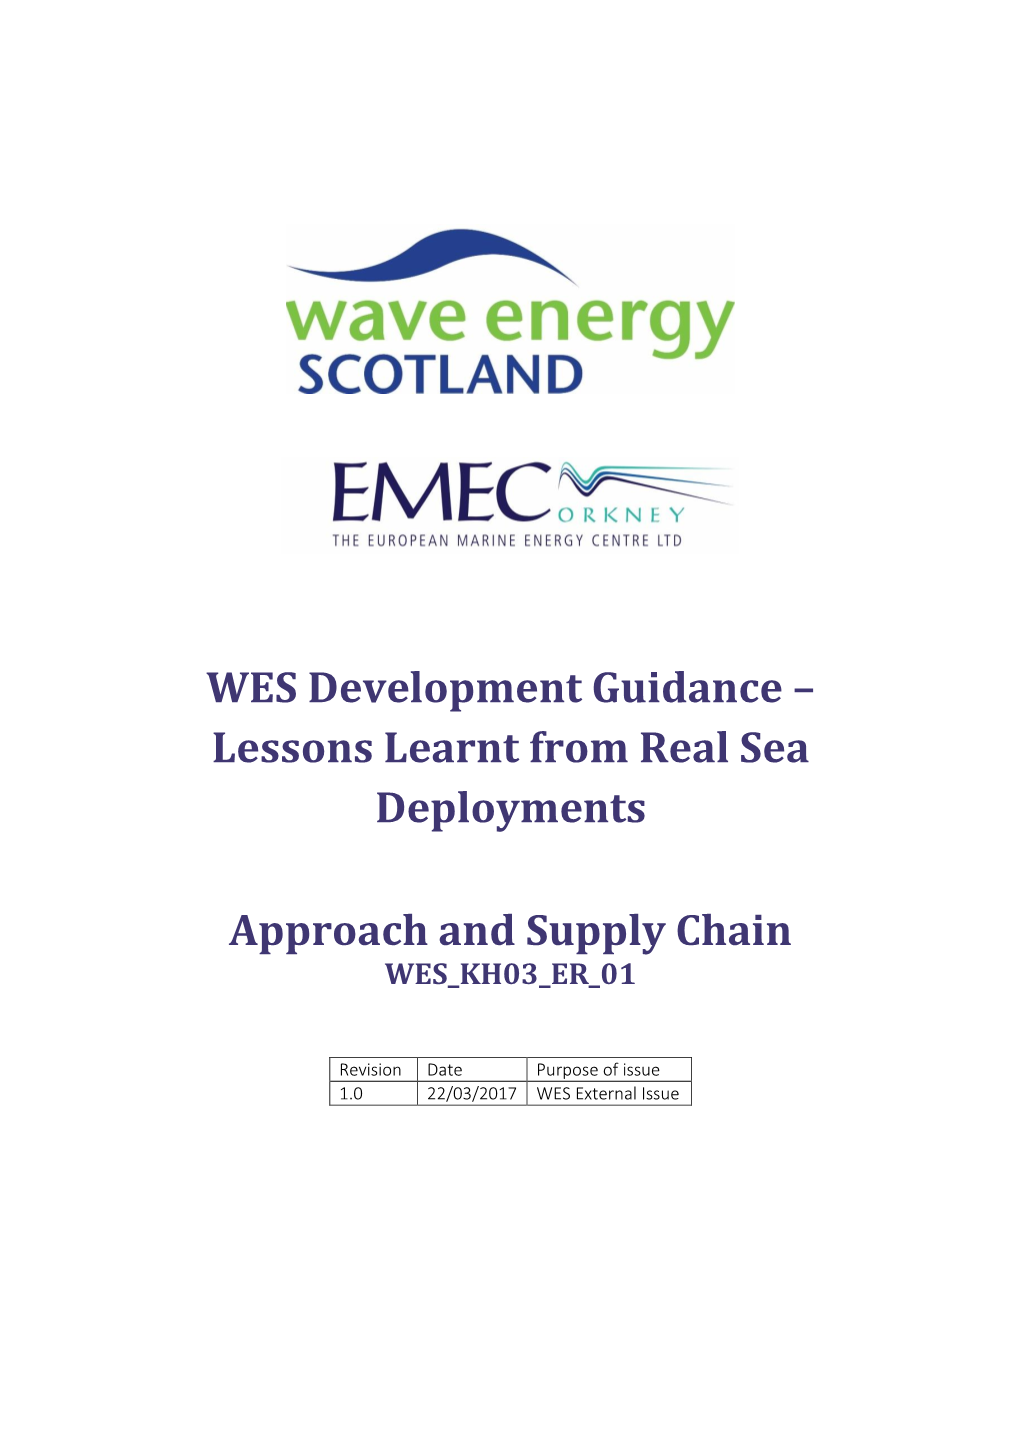 WES Development Guidance – Lessons Learnt from Real Sea Deployments